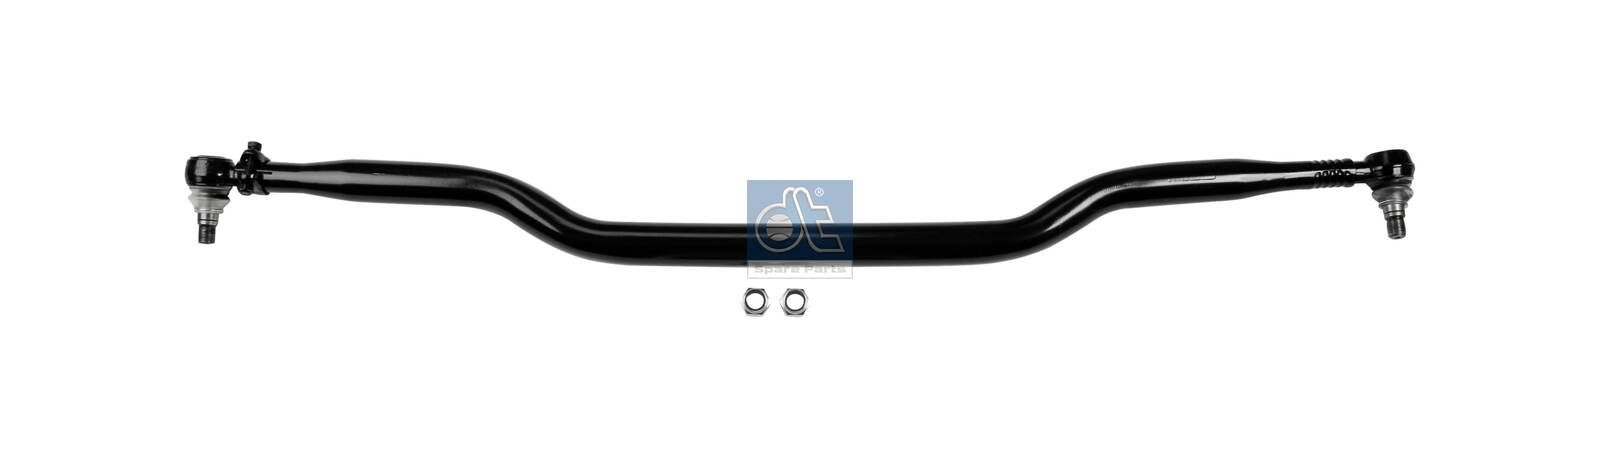 DT Spare Parts 4.63734 Rod Assembly 400 330 0503